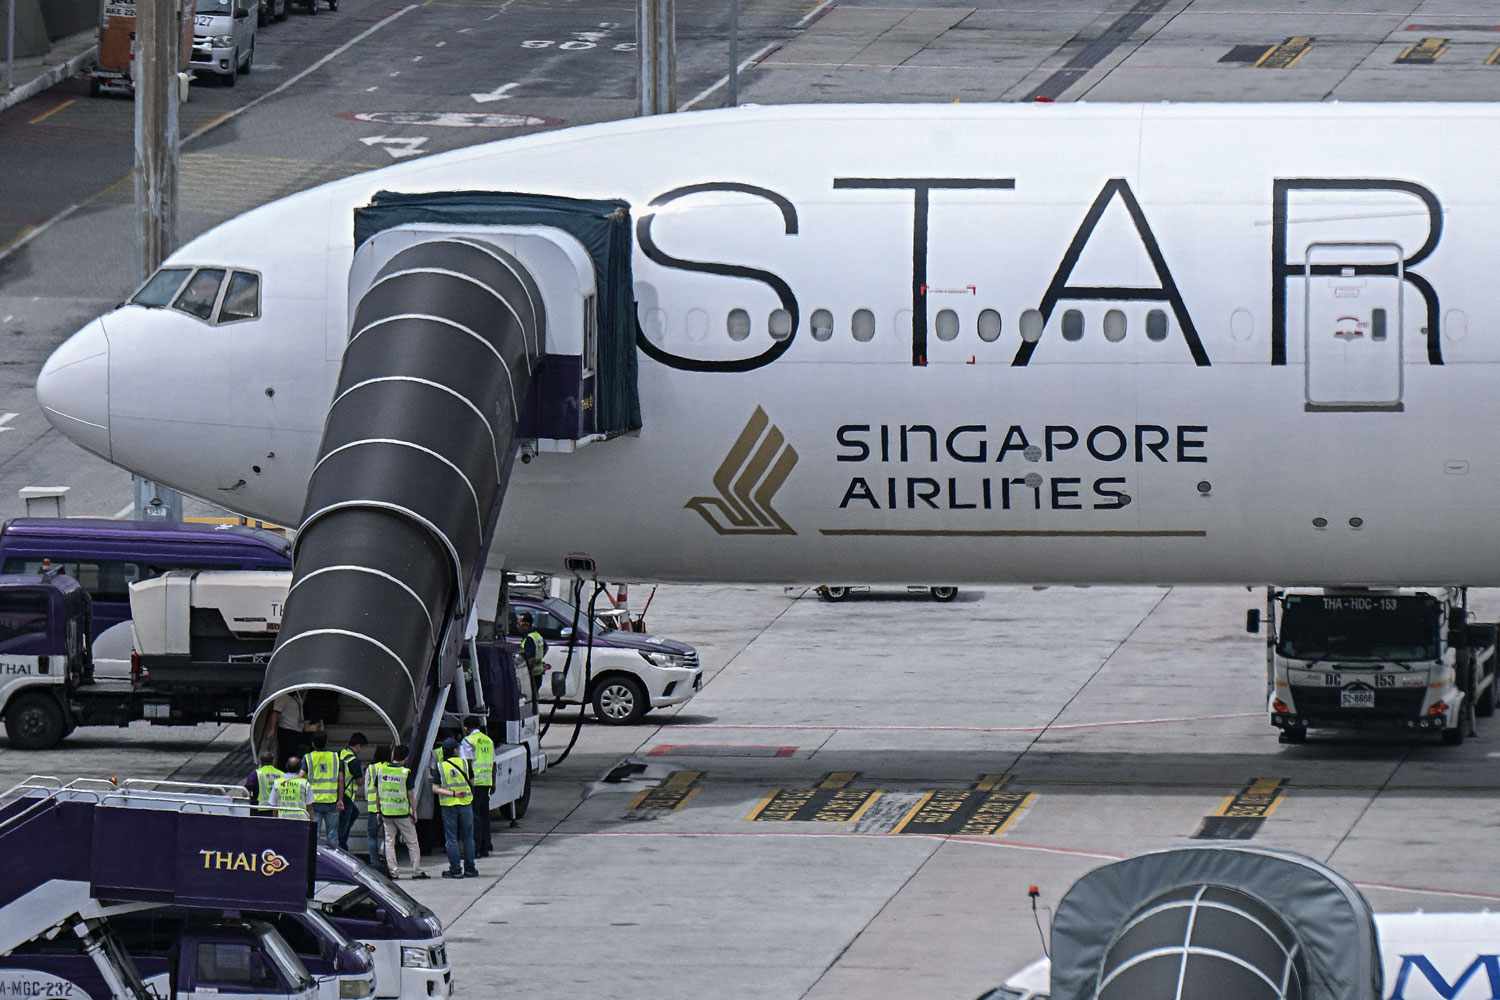 46 Still Hospitalized After Deadly Singapore Airlines Flight, Including 22 with Spinal Injuries